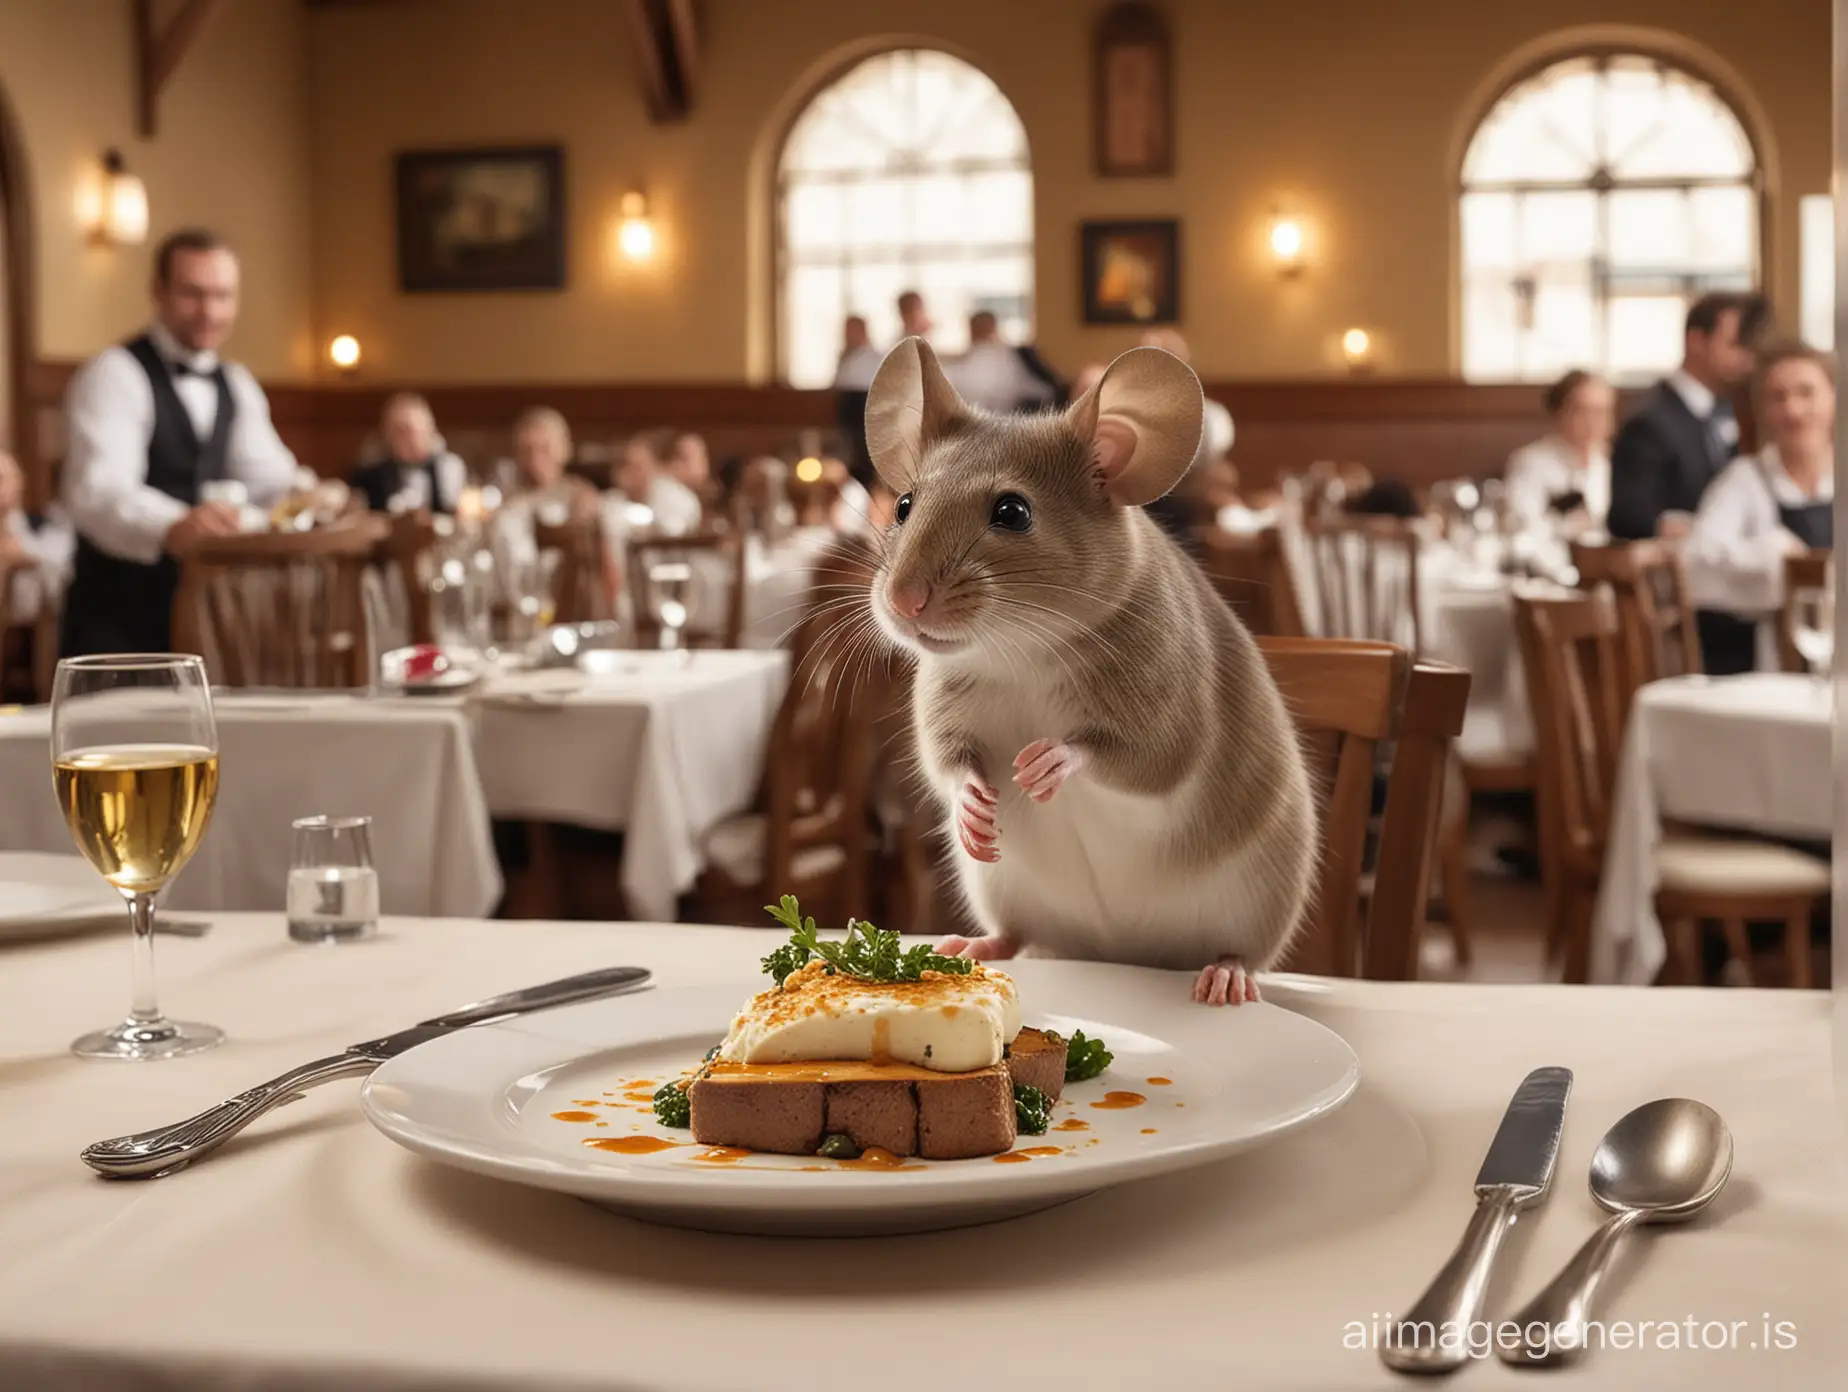 A mouse serves at a table as a waiter in a busy restaurant